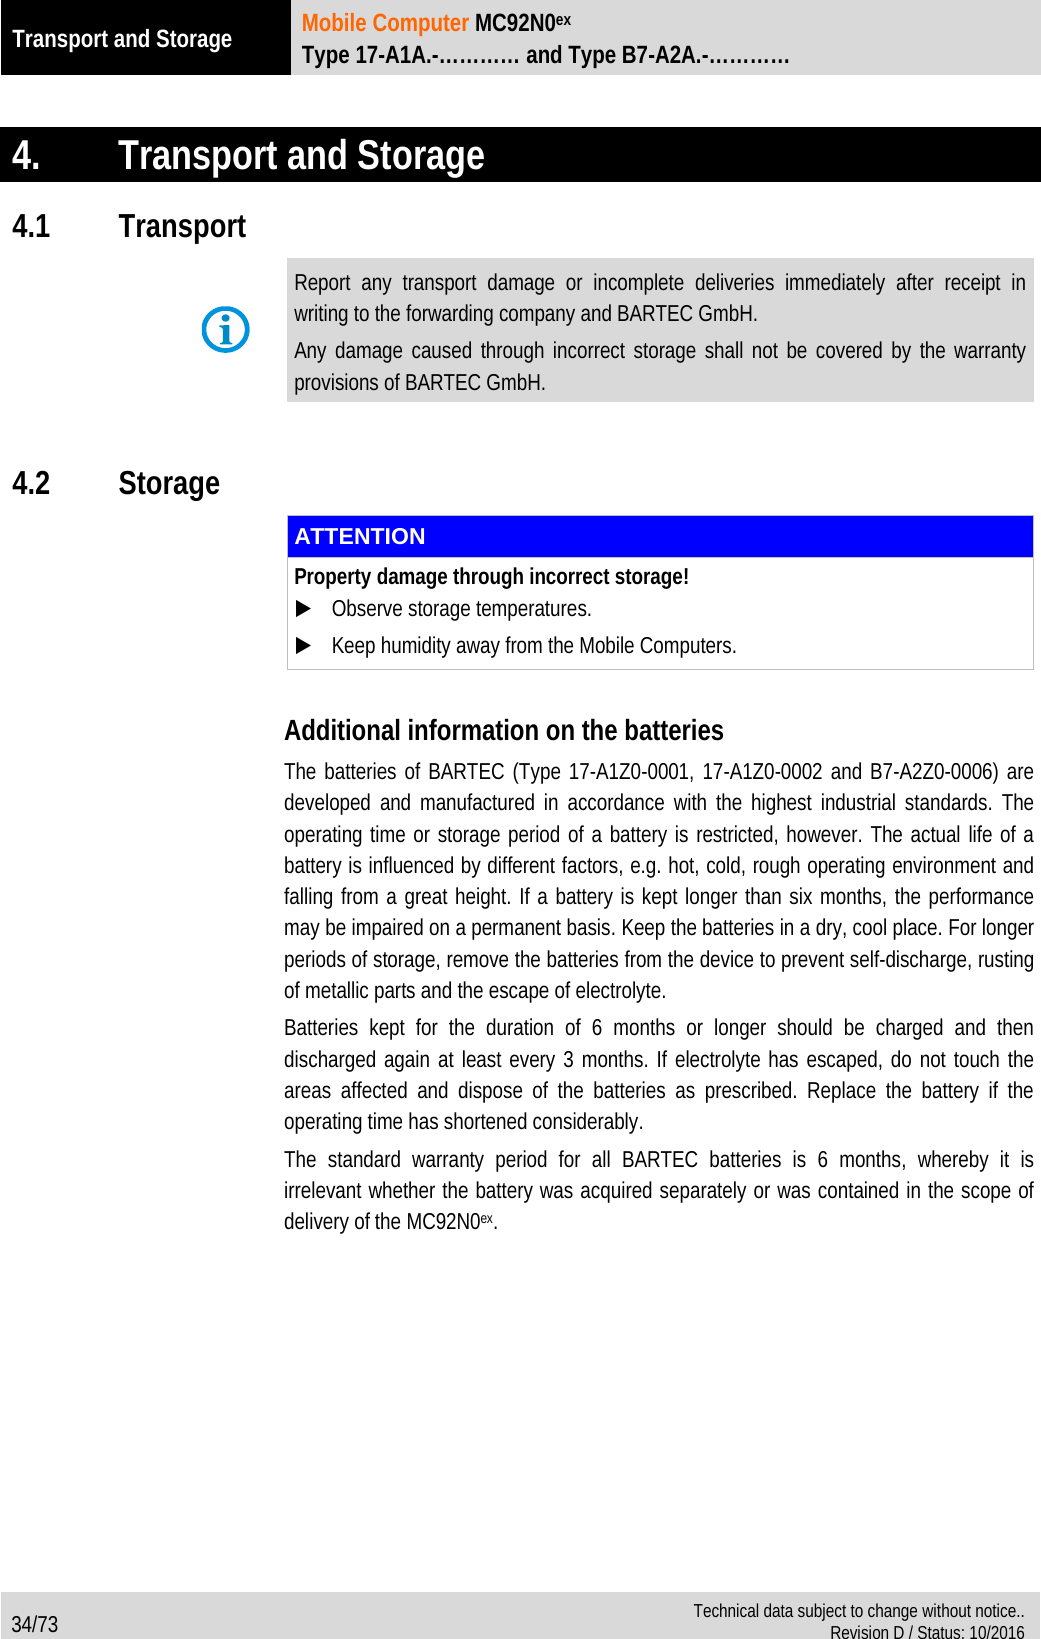 Transport and Storage Mobile Computer MC92N0ex Type 17-A1A.-………… and Type B7-A2A.-…………  34/73  Technical data subject to change without notice.. Revision D / Status: 10/2016   4. Transport and Storage 4.1 Transport  Report any transport damage or incomplete deliveries immediately after receipt in writing to the forwarding company and BARTEC GmbH. Any damage caused through incorrect storage shall not be covered by the warranty provisions of BARTEC GmbH.  4.2 Storage  ATTENTION Property damage through incorrect storage!  Observe storage temperatures.  Keep humidity away from the Mobile Computers.  Additional information on the batteries The batteries of BARTEC (Type 17-A1Z0-0001, 17-A1Z0-0002 and B7-A2Z0-0006) are developed and manufactured in accordance with the highest industrial standards. The operating time or storage period of a battery is restricted, however. The actual life of a battery is influenced by different factors, e.g. hot, cold, rough operating environment and falling from a great height. If a battery is kept longer than six months, the performance may be impaired on a permanent basis. Keep the batteries in a dry, cool place. For longer periods of storage, remove the batteries from the device to prevent self-discharge, rusting of metallic parts and the escape of electrolyte. Batteries kept for the duration of 6 months or longer should be charged and then discharged again at least every 3 months. If electrolyte has escaped, do not touch the areas affected and dispose of the batteries as prescribed. Replace the battery if the operating time has shortened considerably.  The standard warranty period for all BARTEC batteries is 6 months,  whereby it is irrelevant whether the battery was acquired separately or was contained in the scope of delivery of the MC92N0ex.  